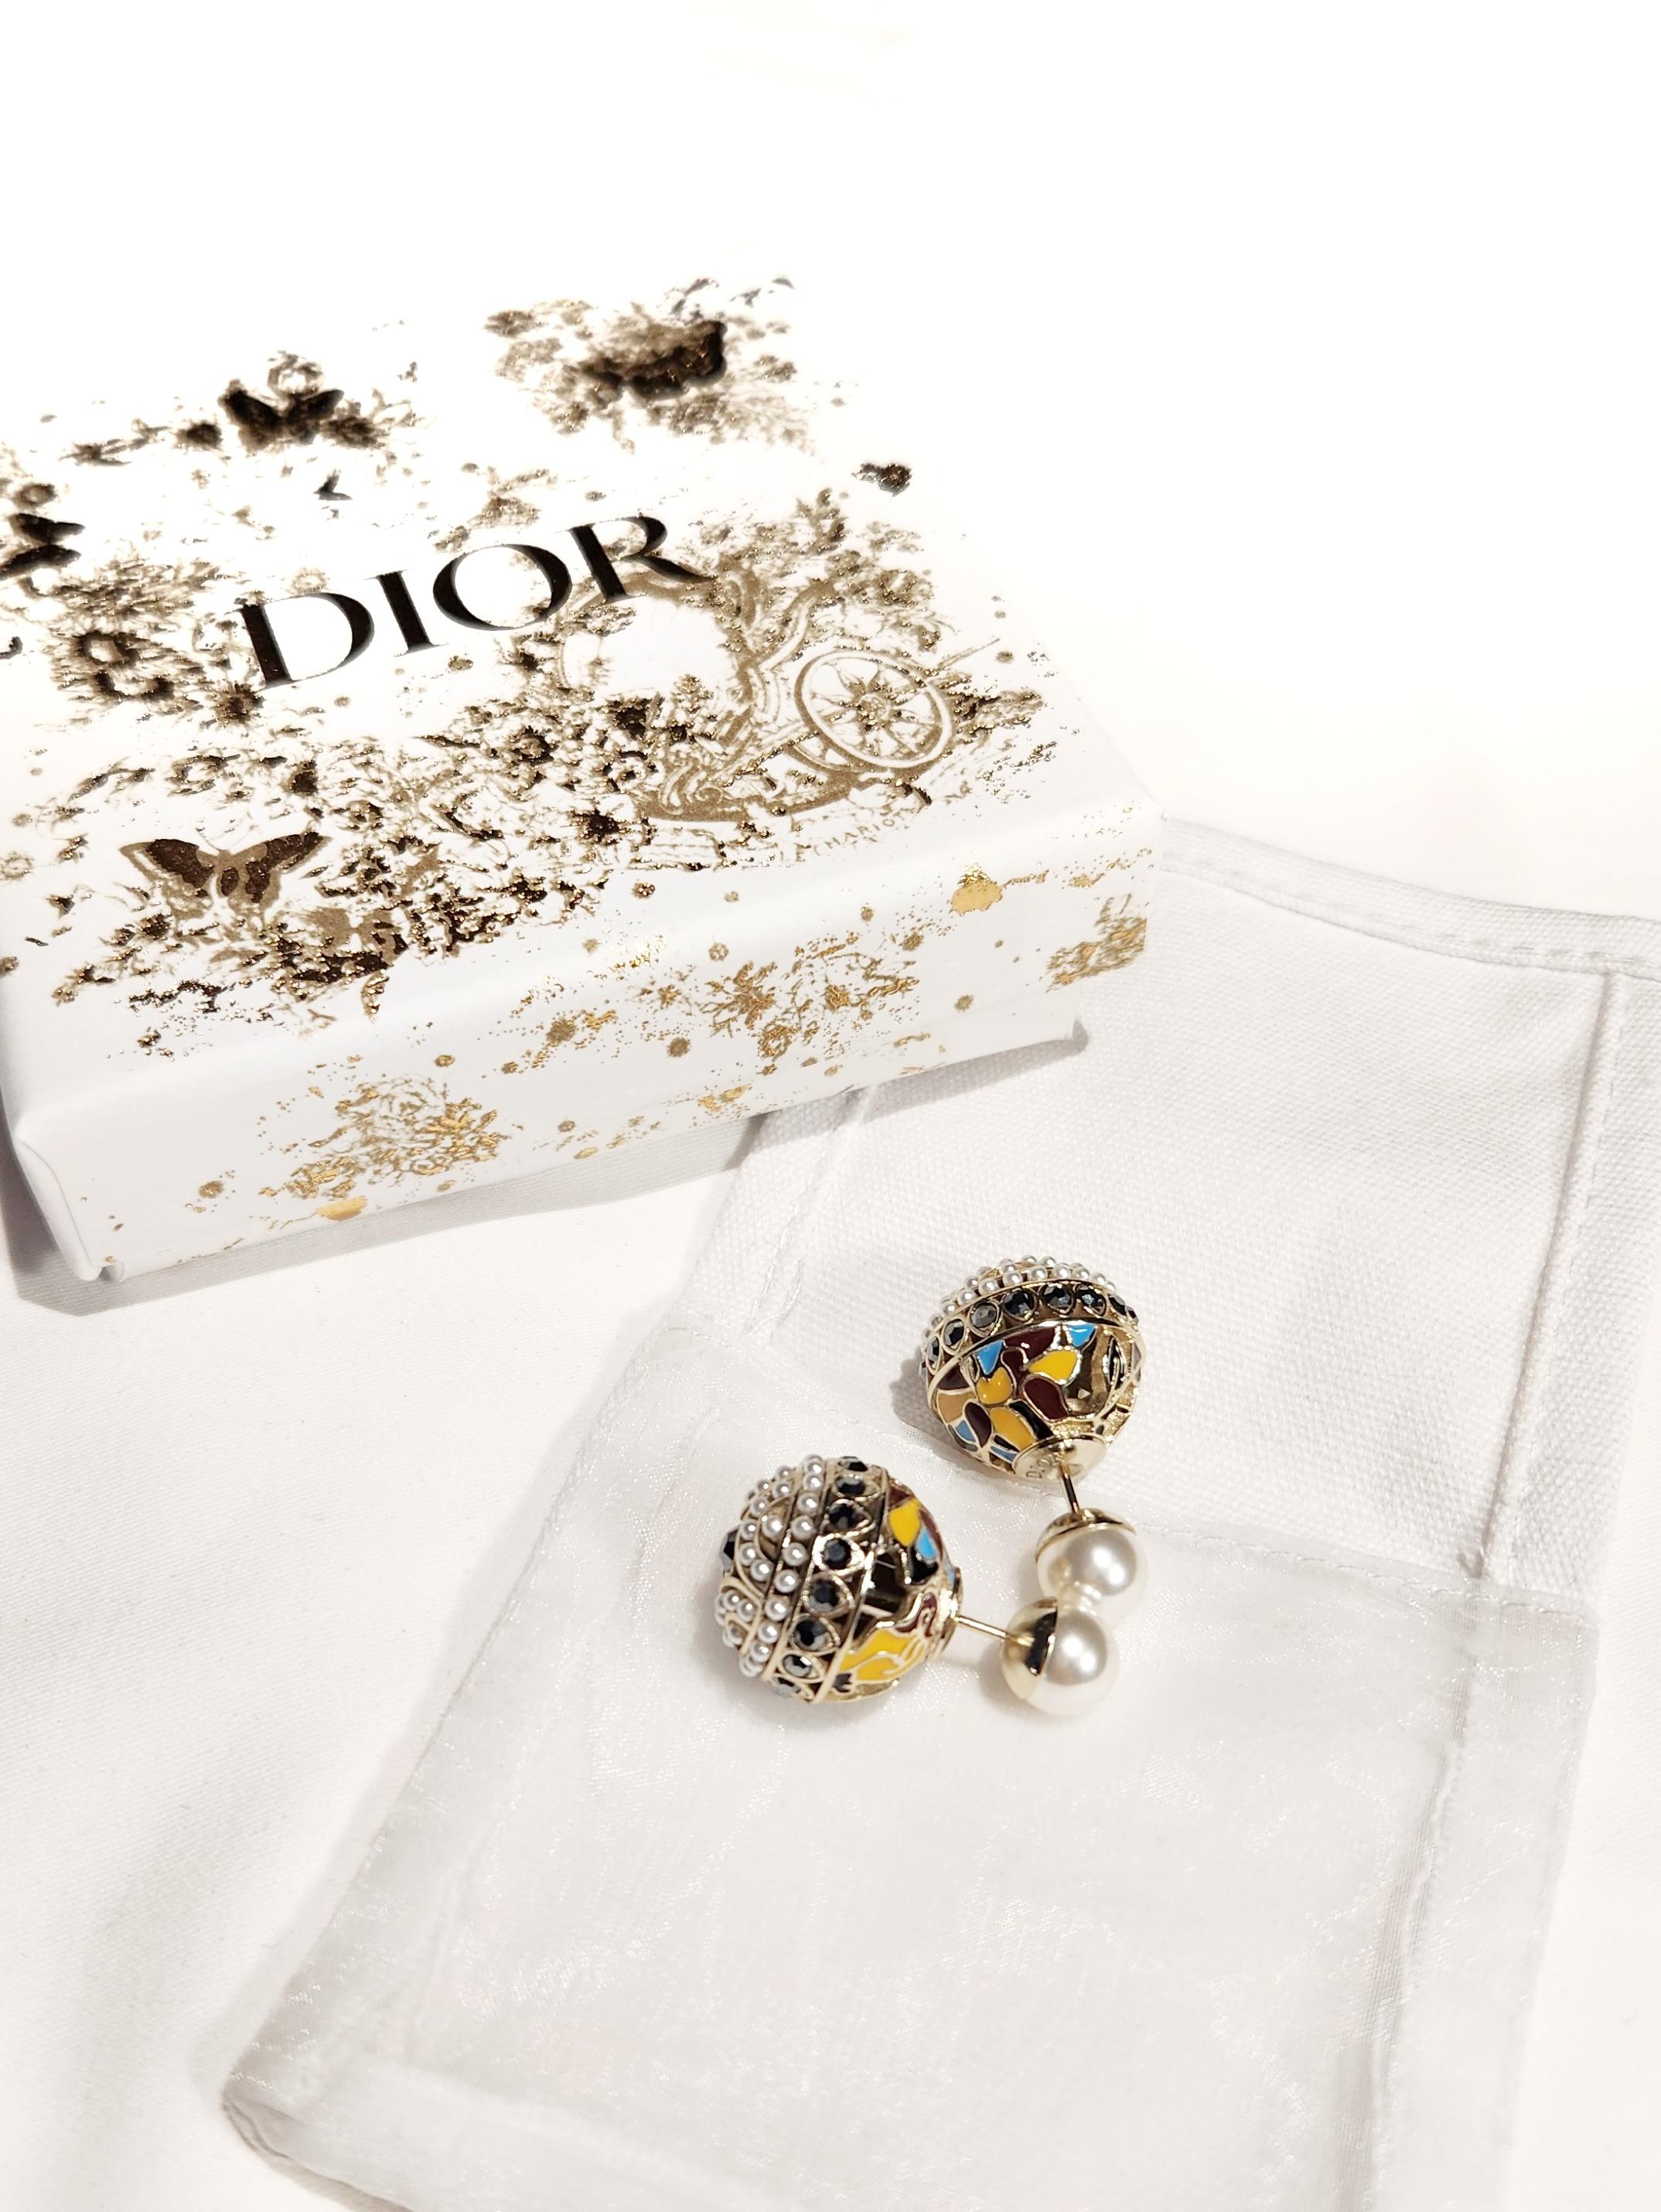 Indulge in the epitome of opulence with the Christian Dior Tribales Coloured Enamel Metal Black Rhinestones Pearls Earrings. These exquisite earrings are a harmonious blend of vibrant colors, intricate detailing, and luxurious materials, reflecting